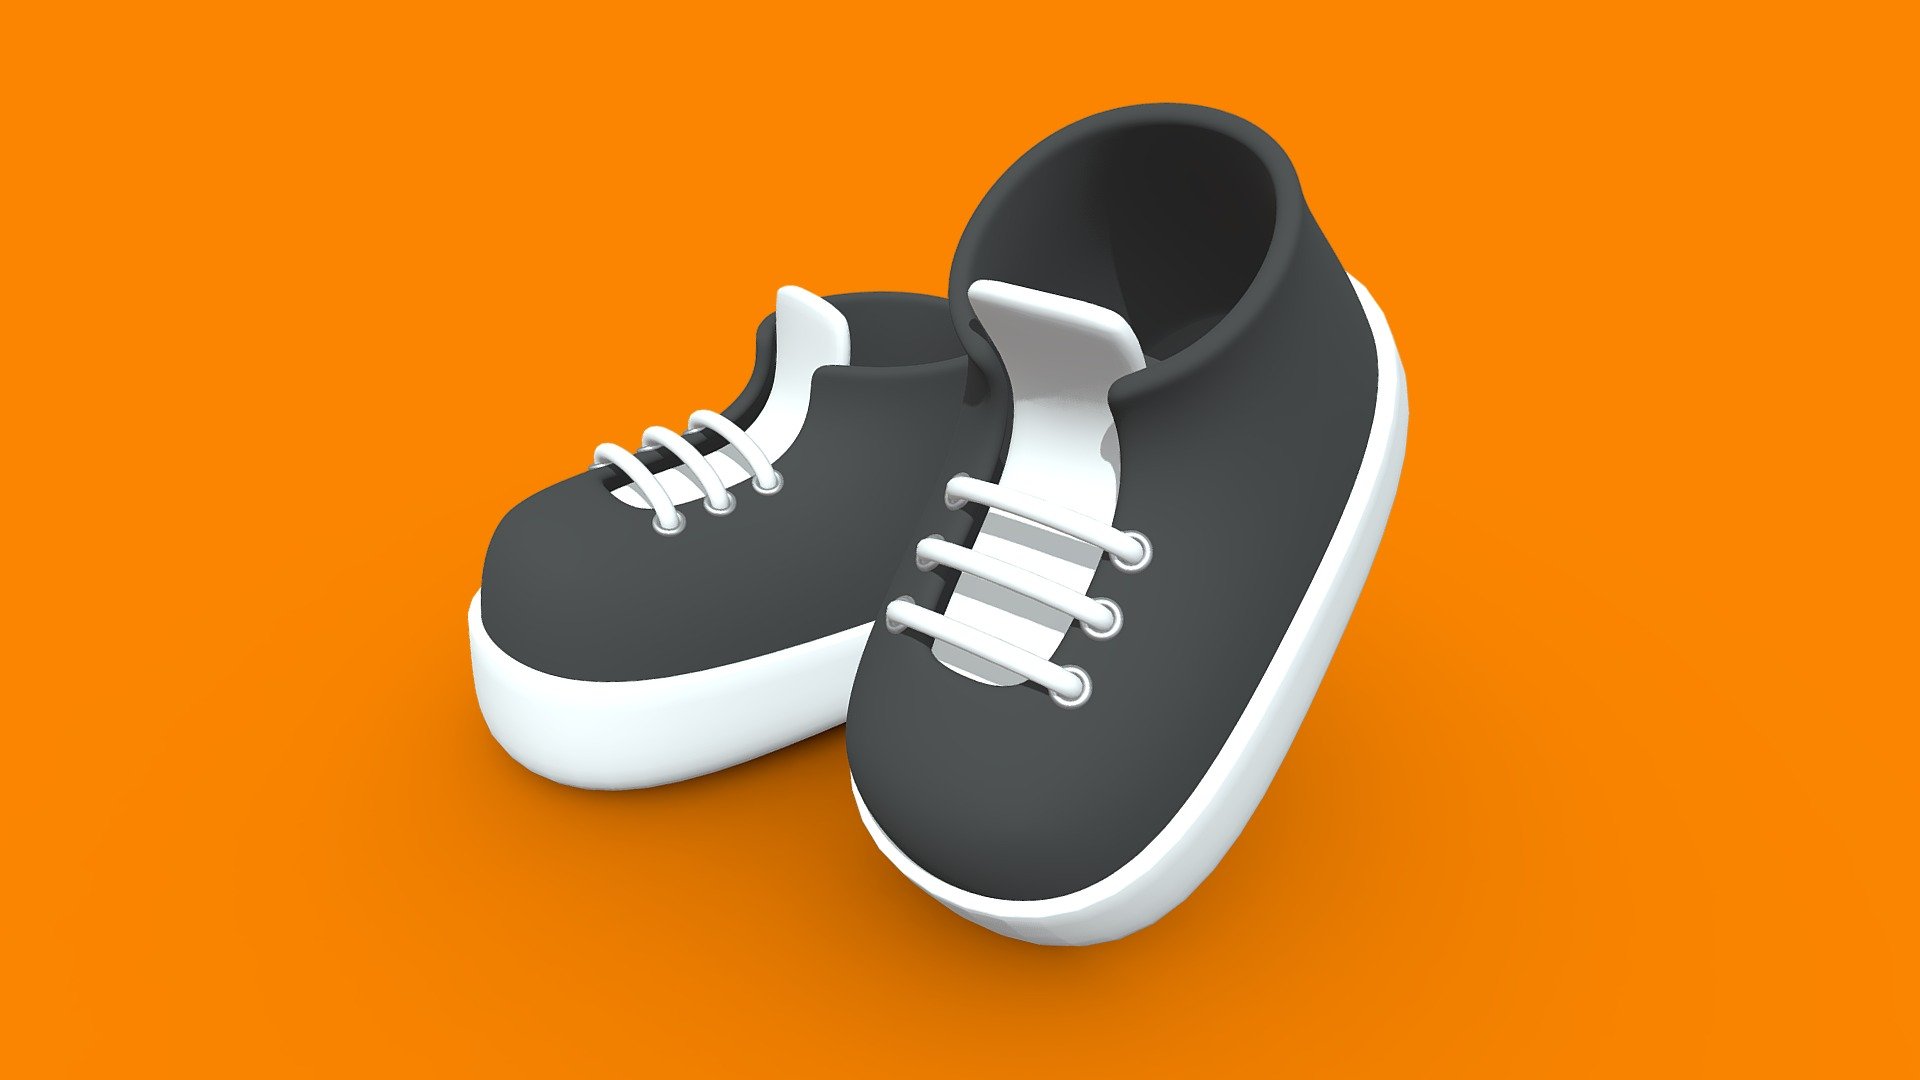 Simple stylized cartoon shoe - Stylized Cartoon Shoes - Download Free 3D model by Ndevisuals (@Wade23) 3d model